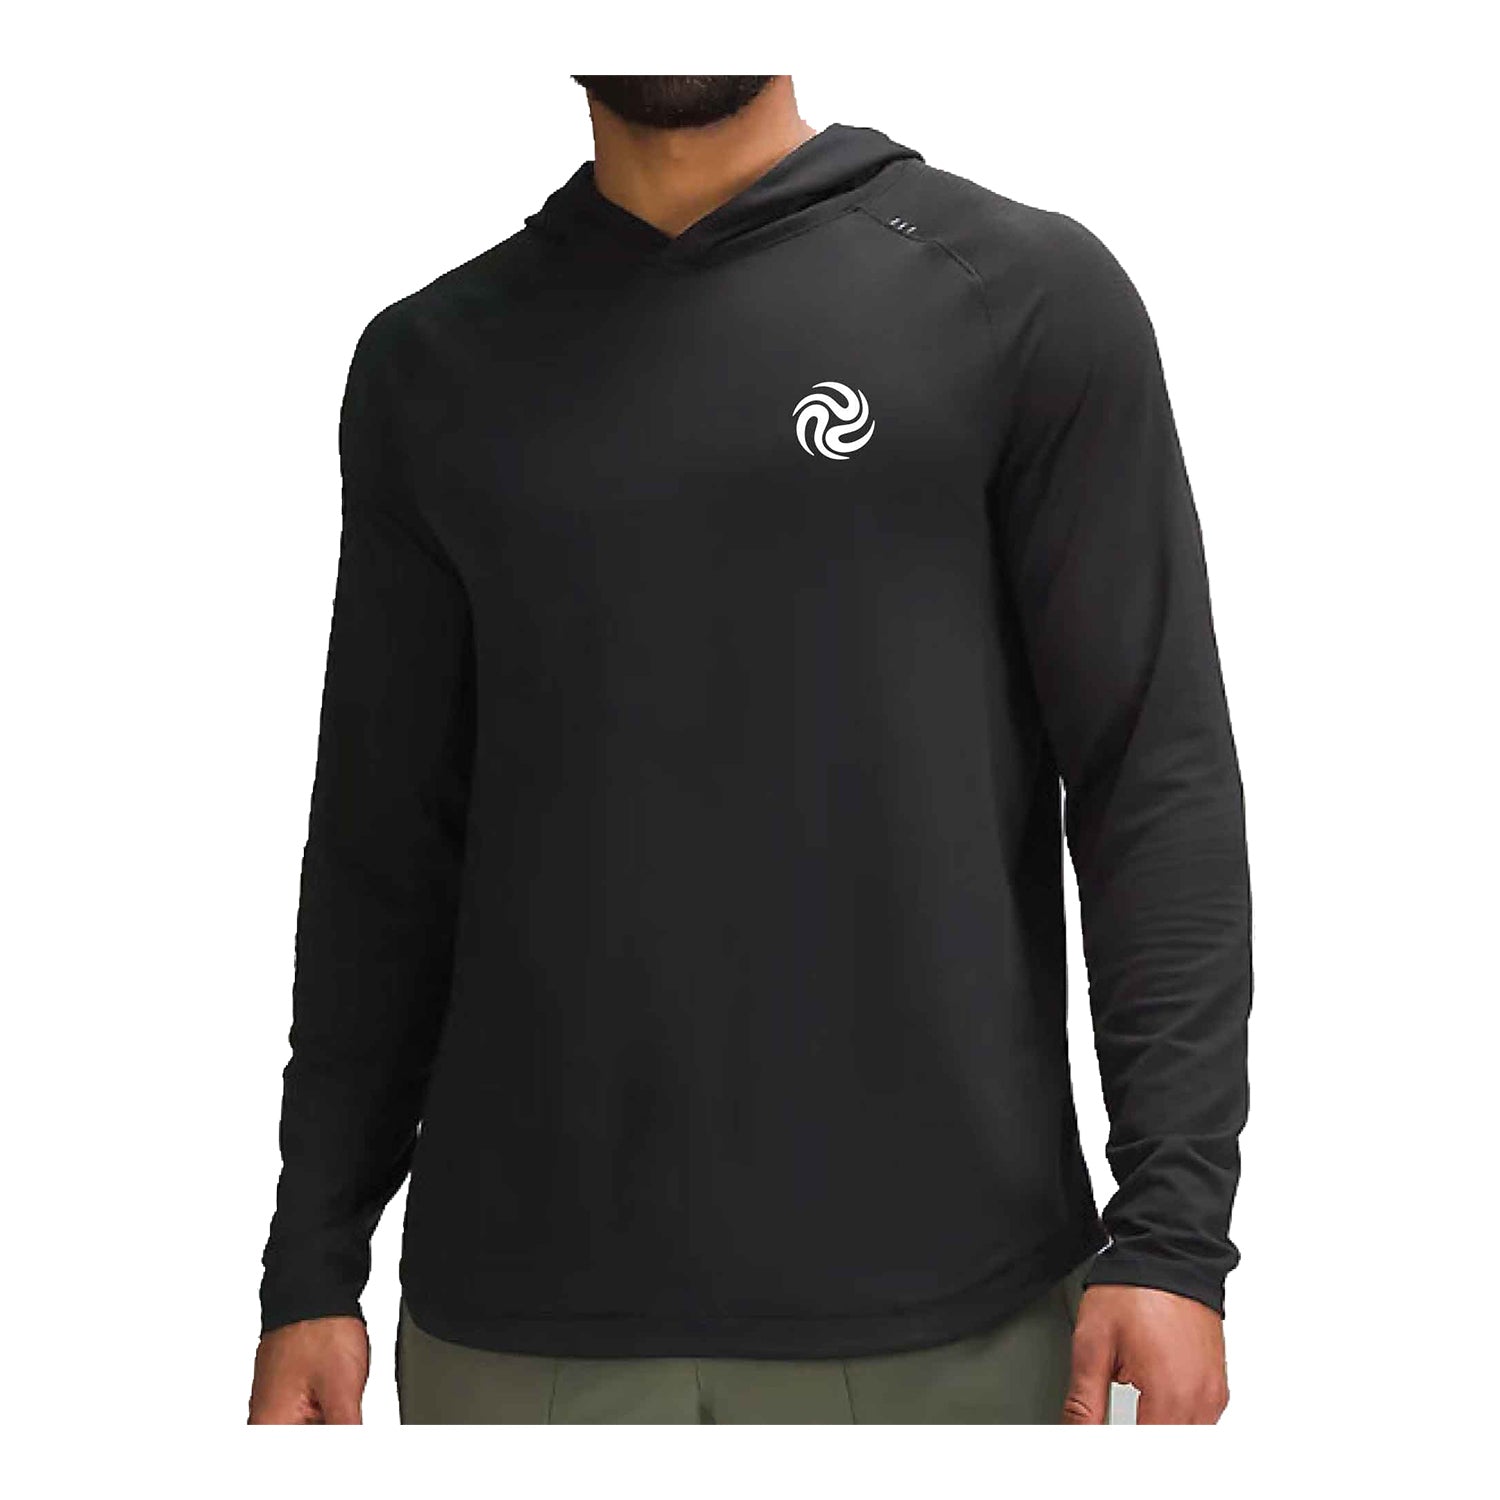 lululemon LICENSE TO TRAIN CLASSIC-FIT - Long sleeved top